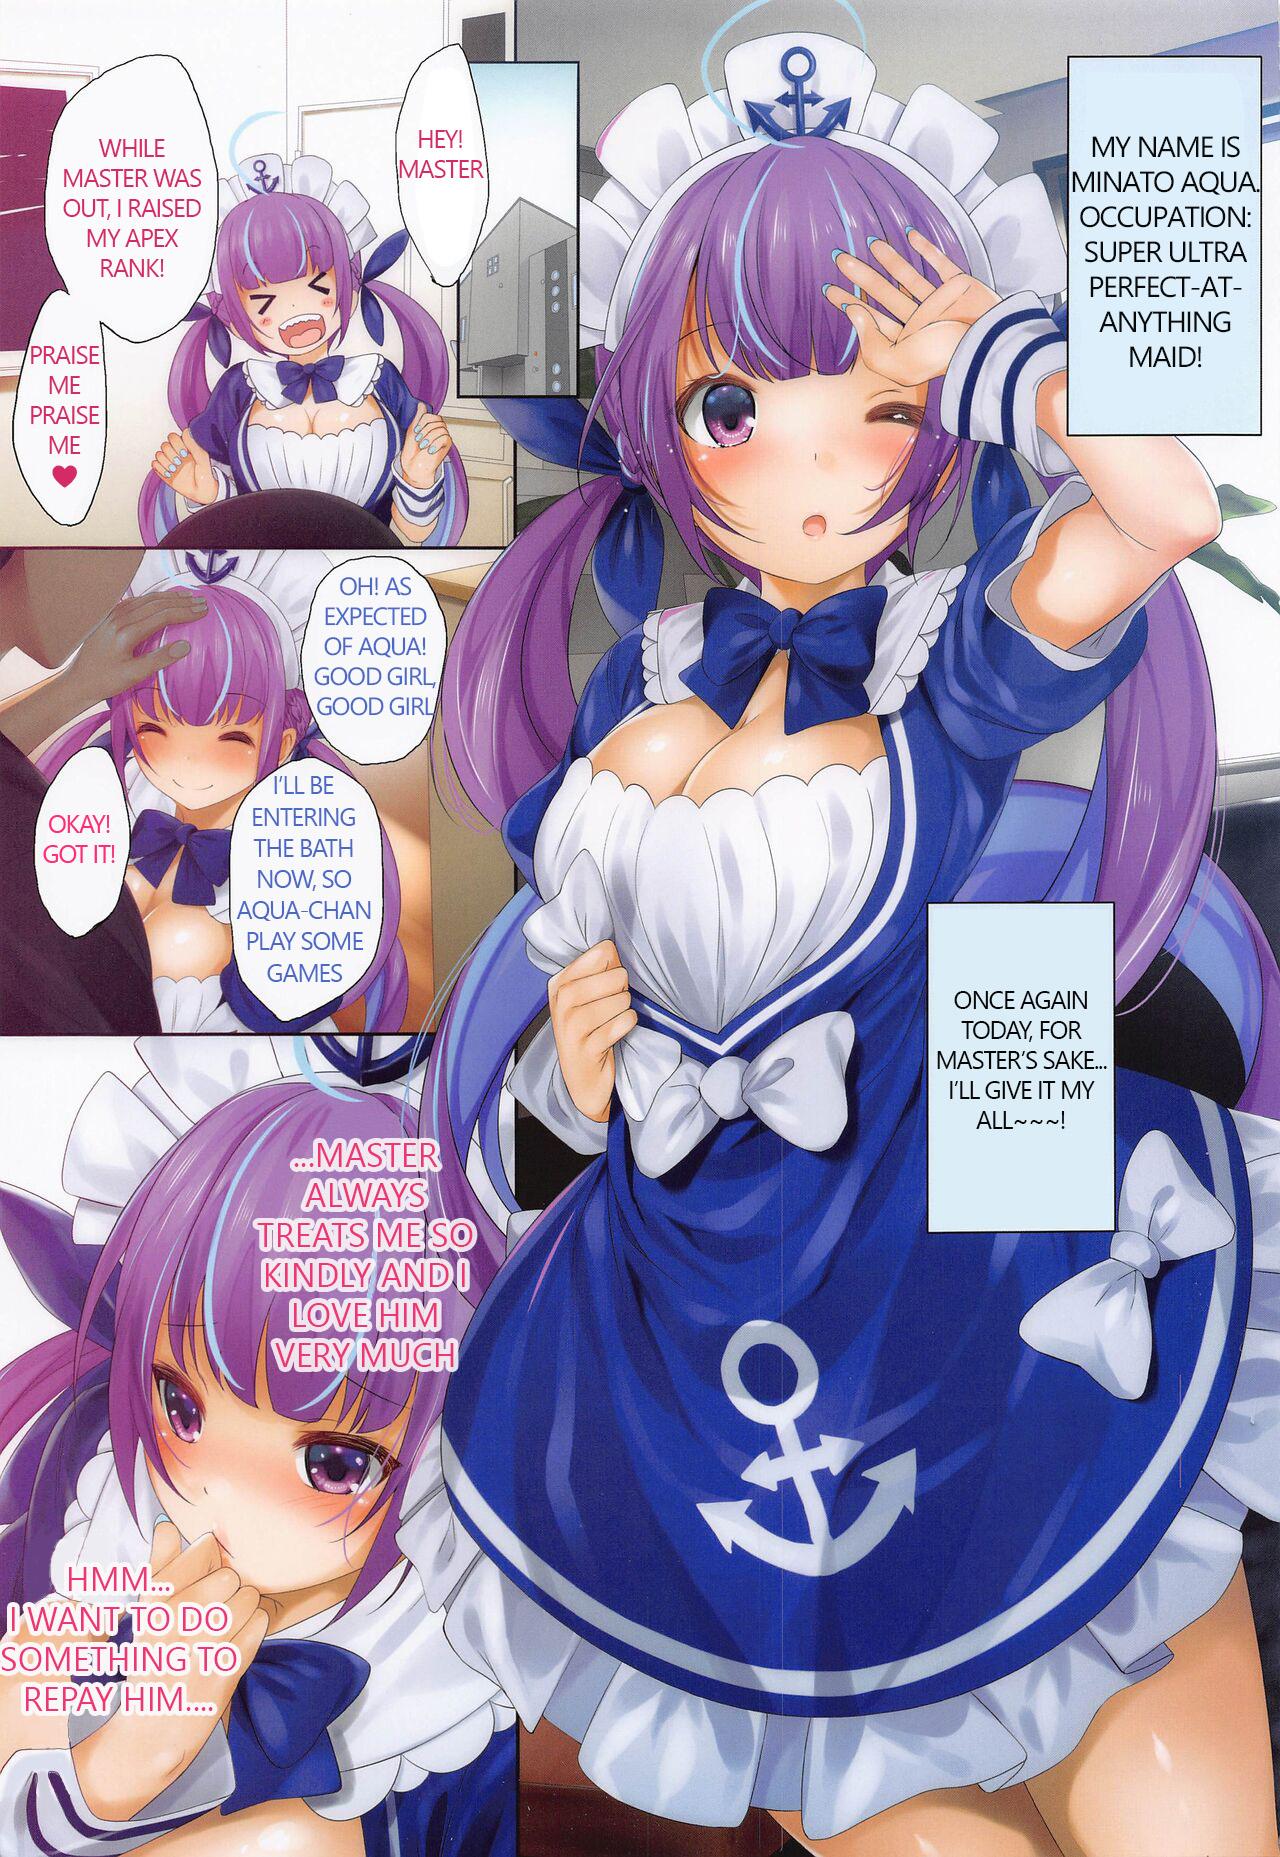 Mamando A・Q・U・A for the LOVE - Hololive Students - Page 2